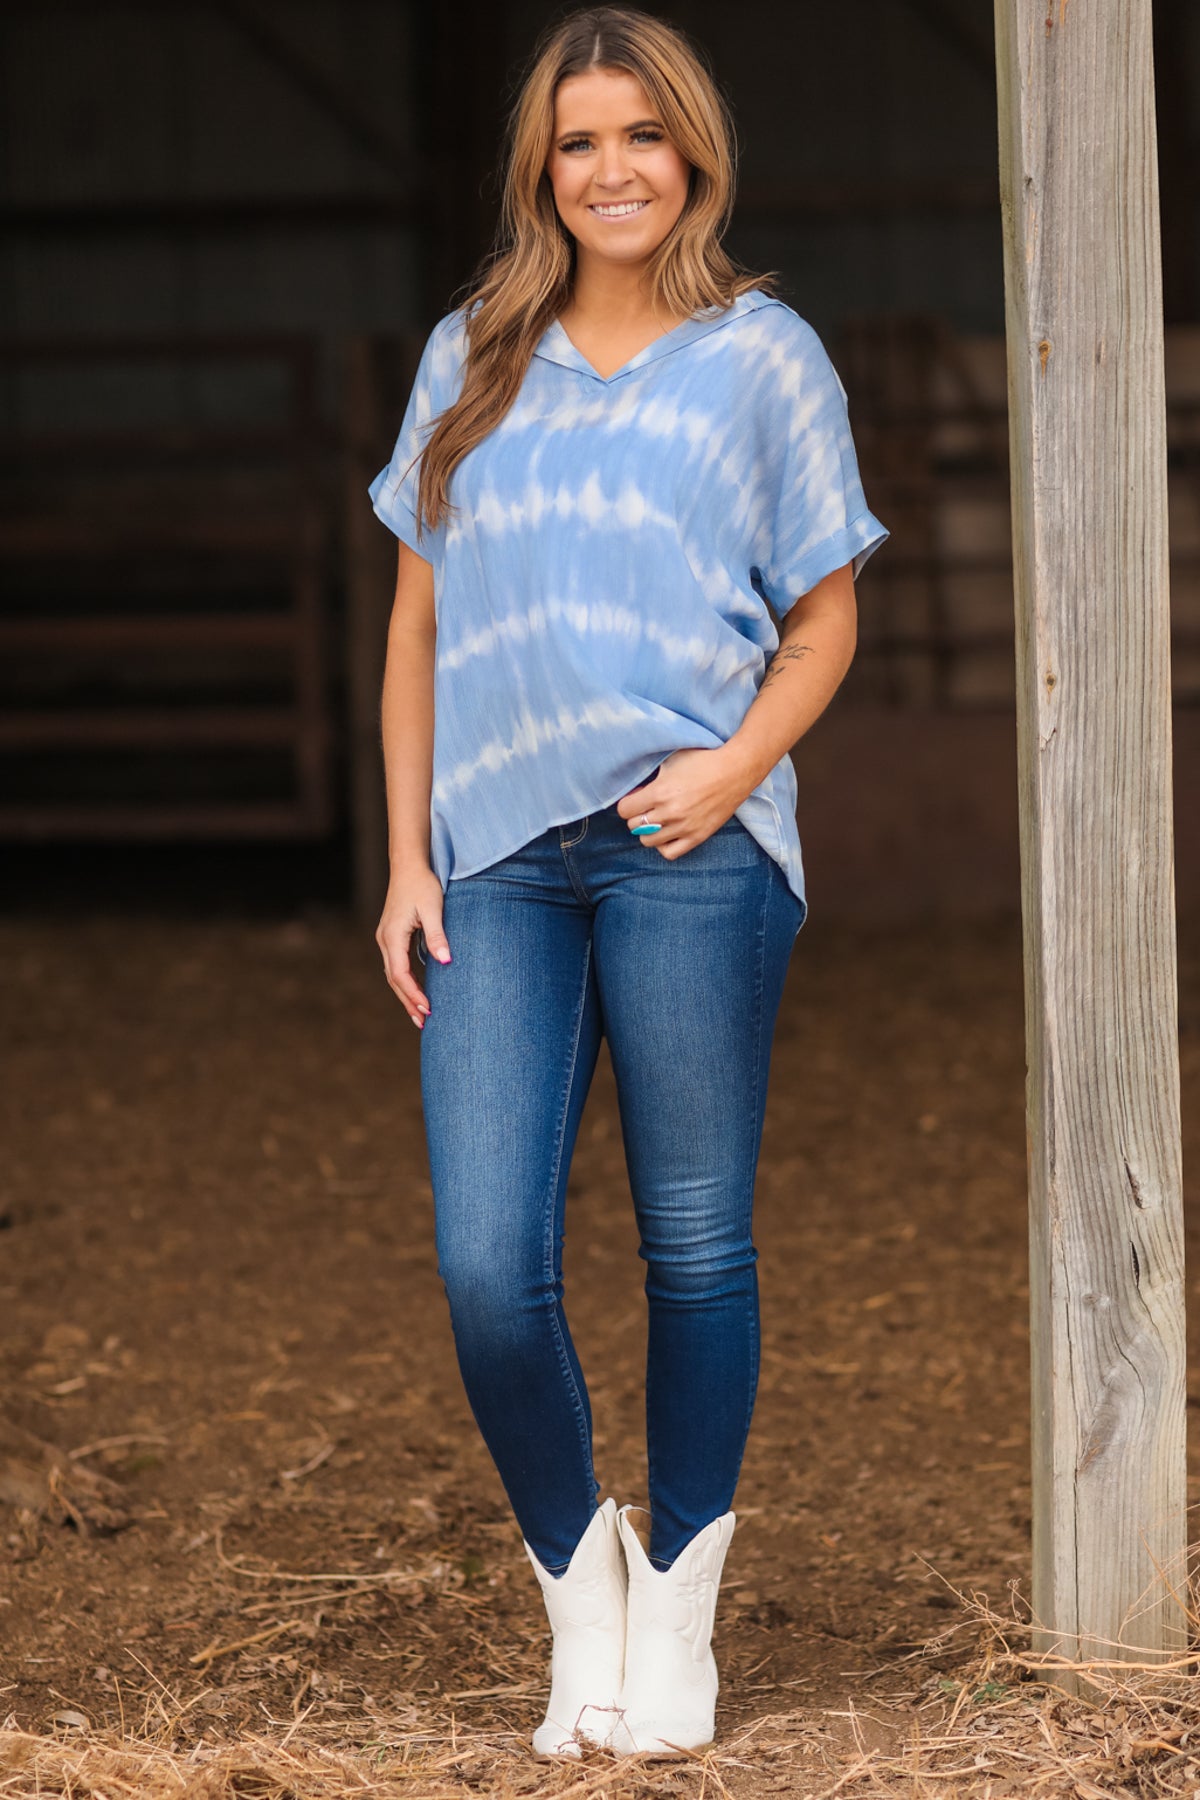 Pastel Blue Tie Dye Cuffed Sleeve Top - Filly Flair